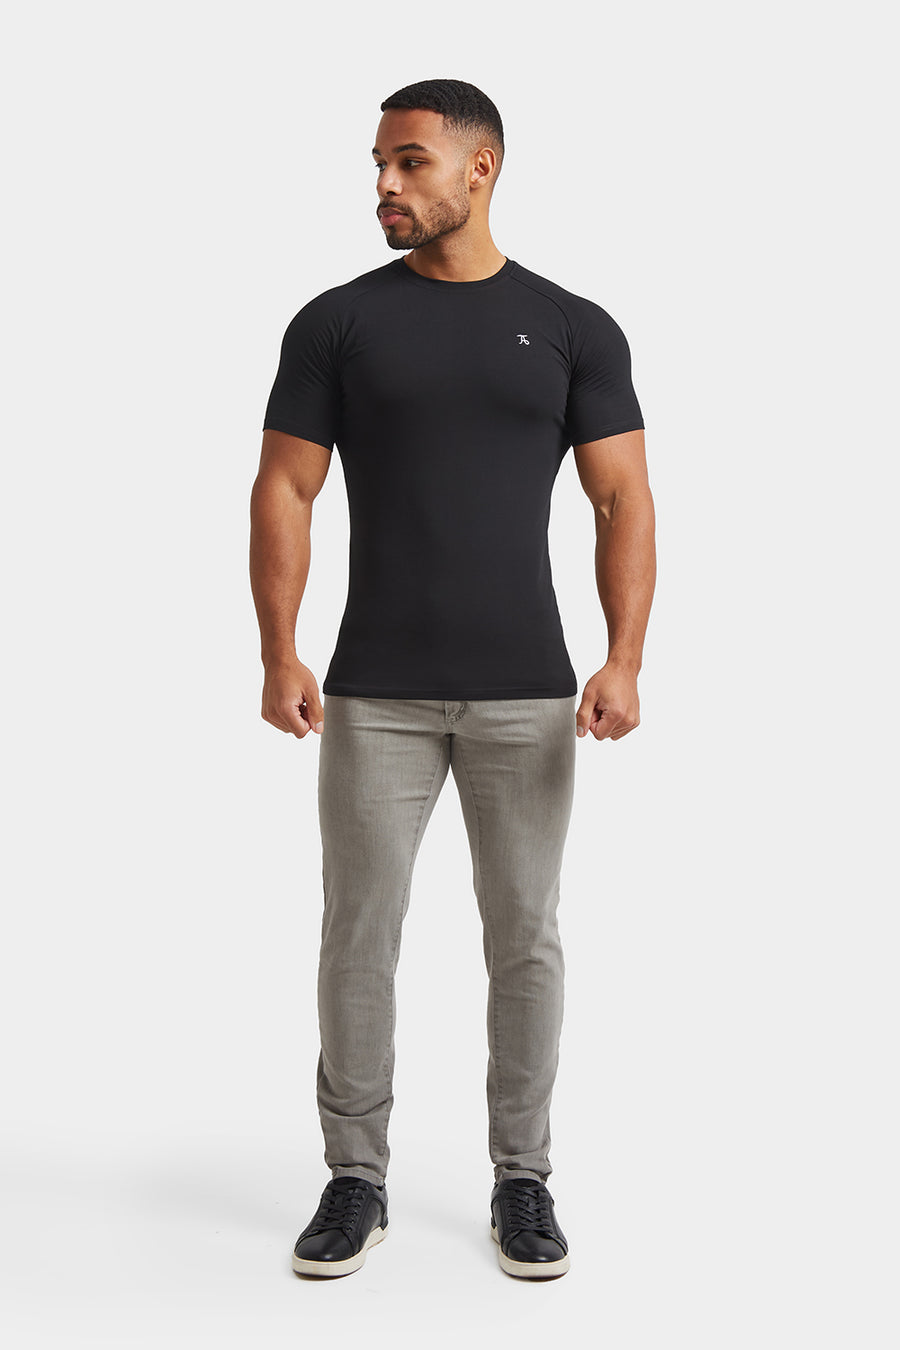 Athletic Fit Jeans in Light Grey - TAILORED ATHLETE - USA